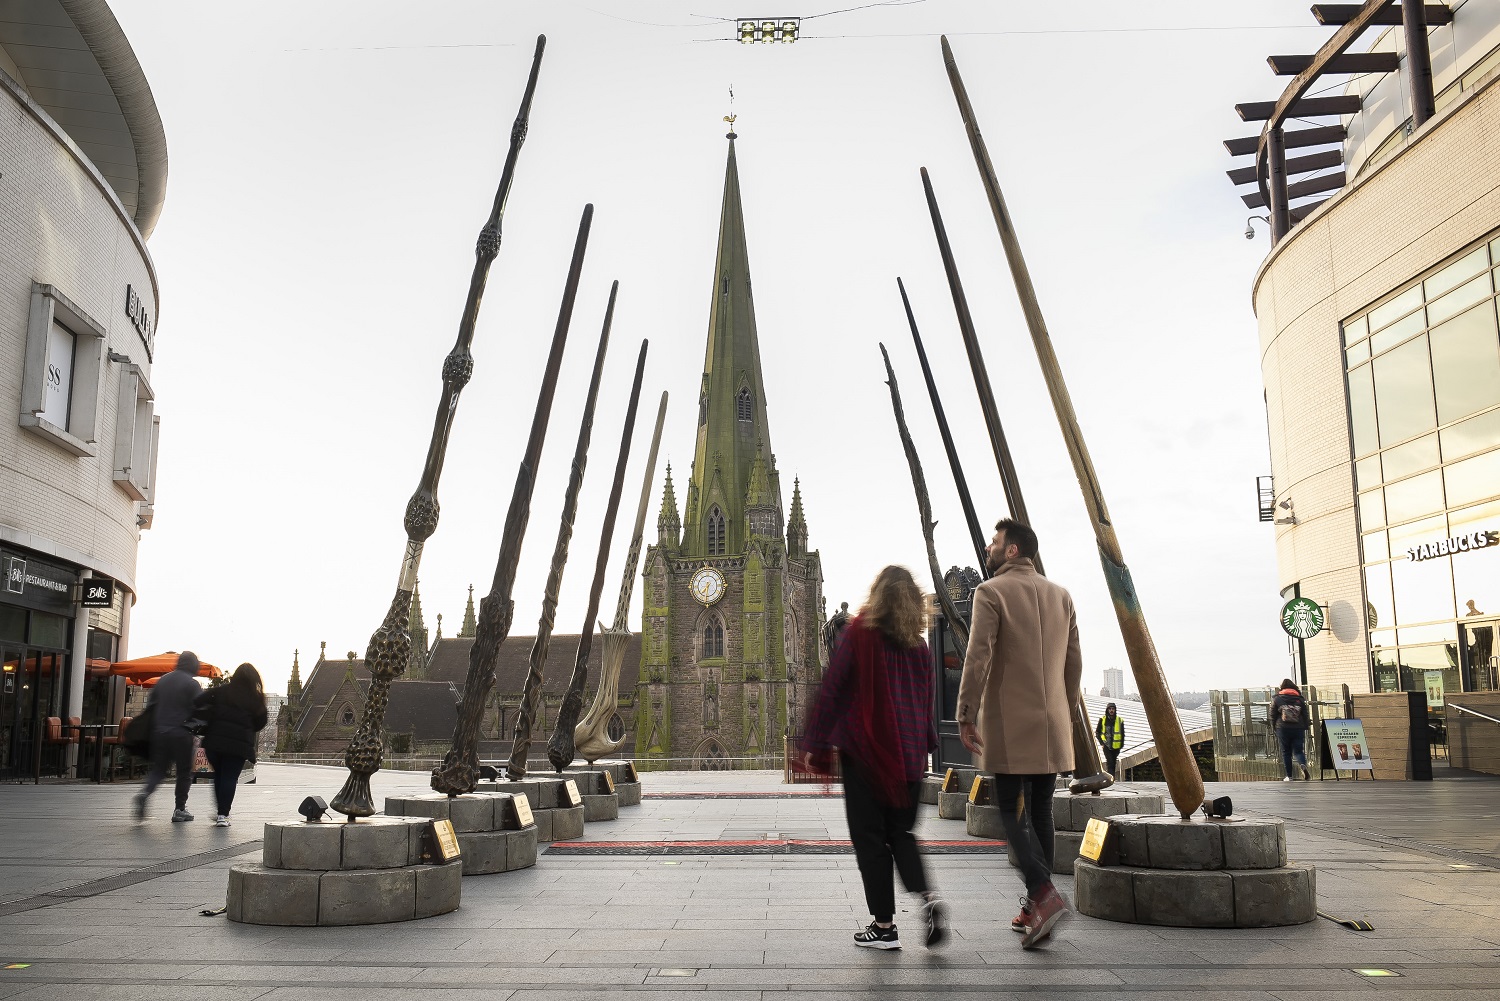 The Wizarding World wand installation appeared in Birmingham on March 11, 2022.